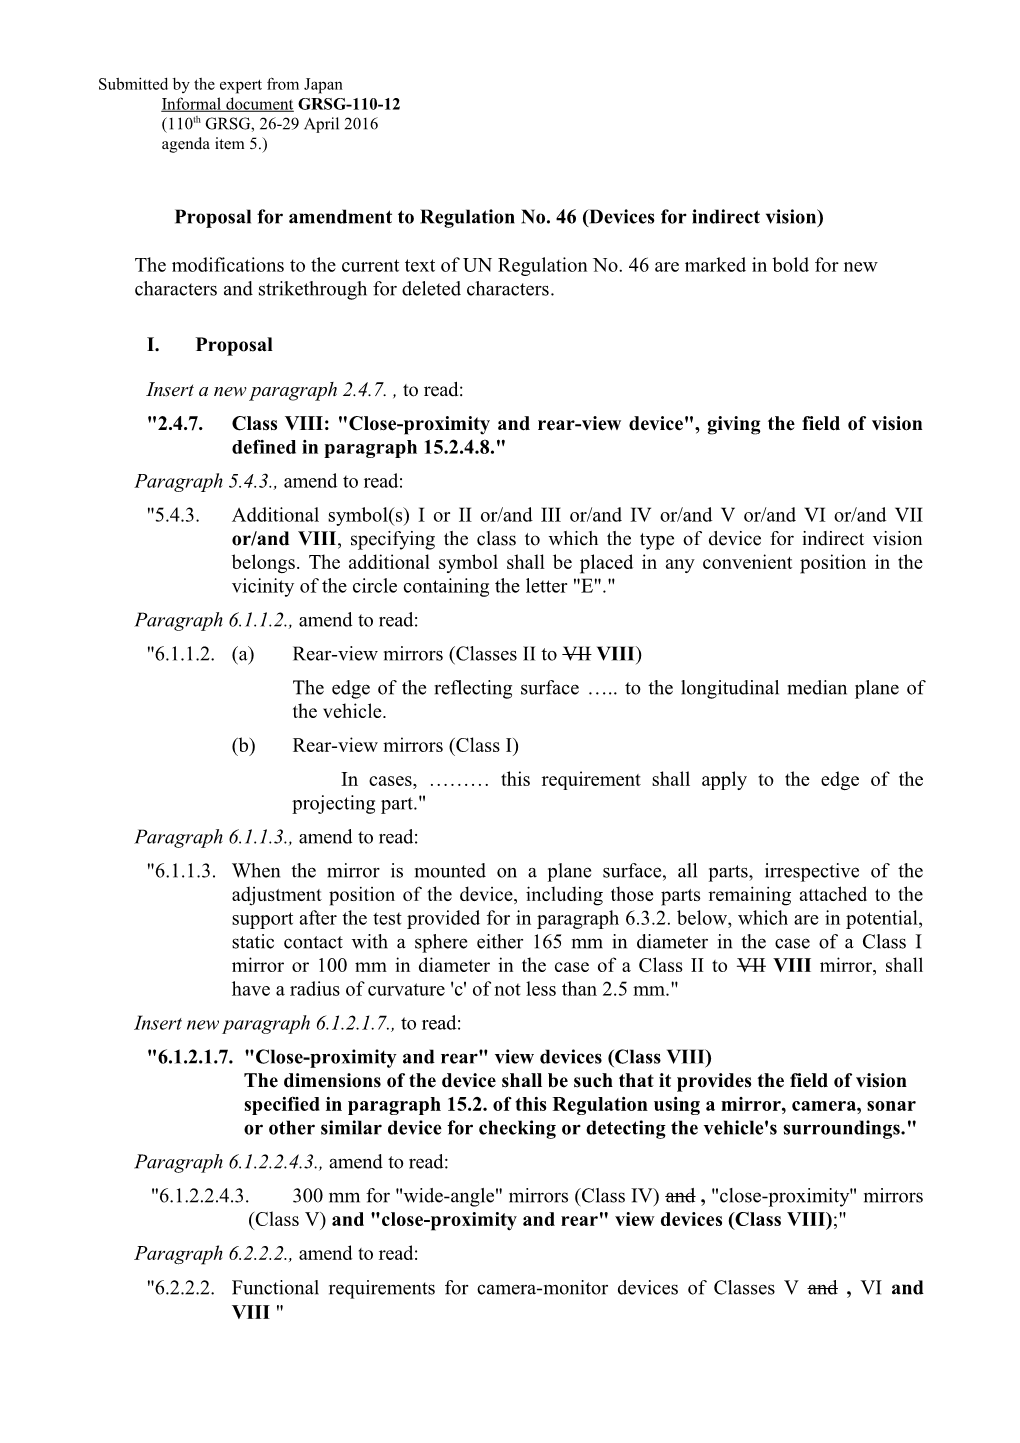 Proposal for Amendment to Regulation No. 46(Devices for Indirect Vision)